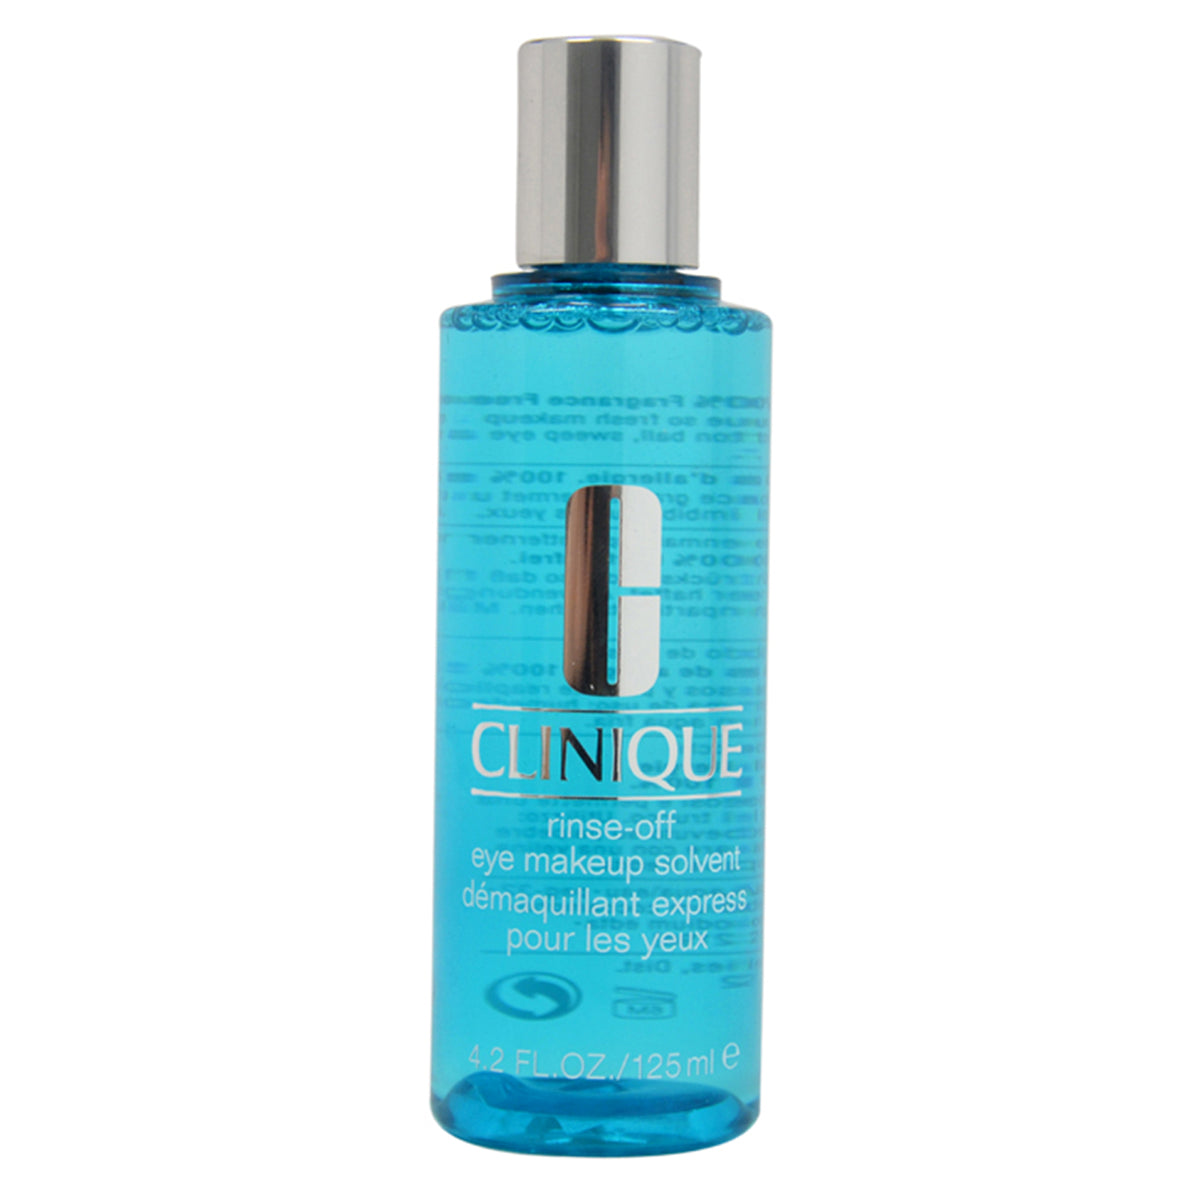 Rinse Off Eye Makeup Solvent by Clinique for Unisex - 4.2 oz Makeup Remover